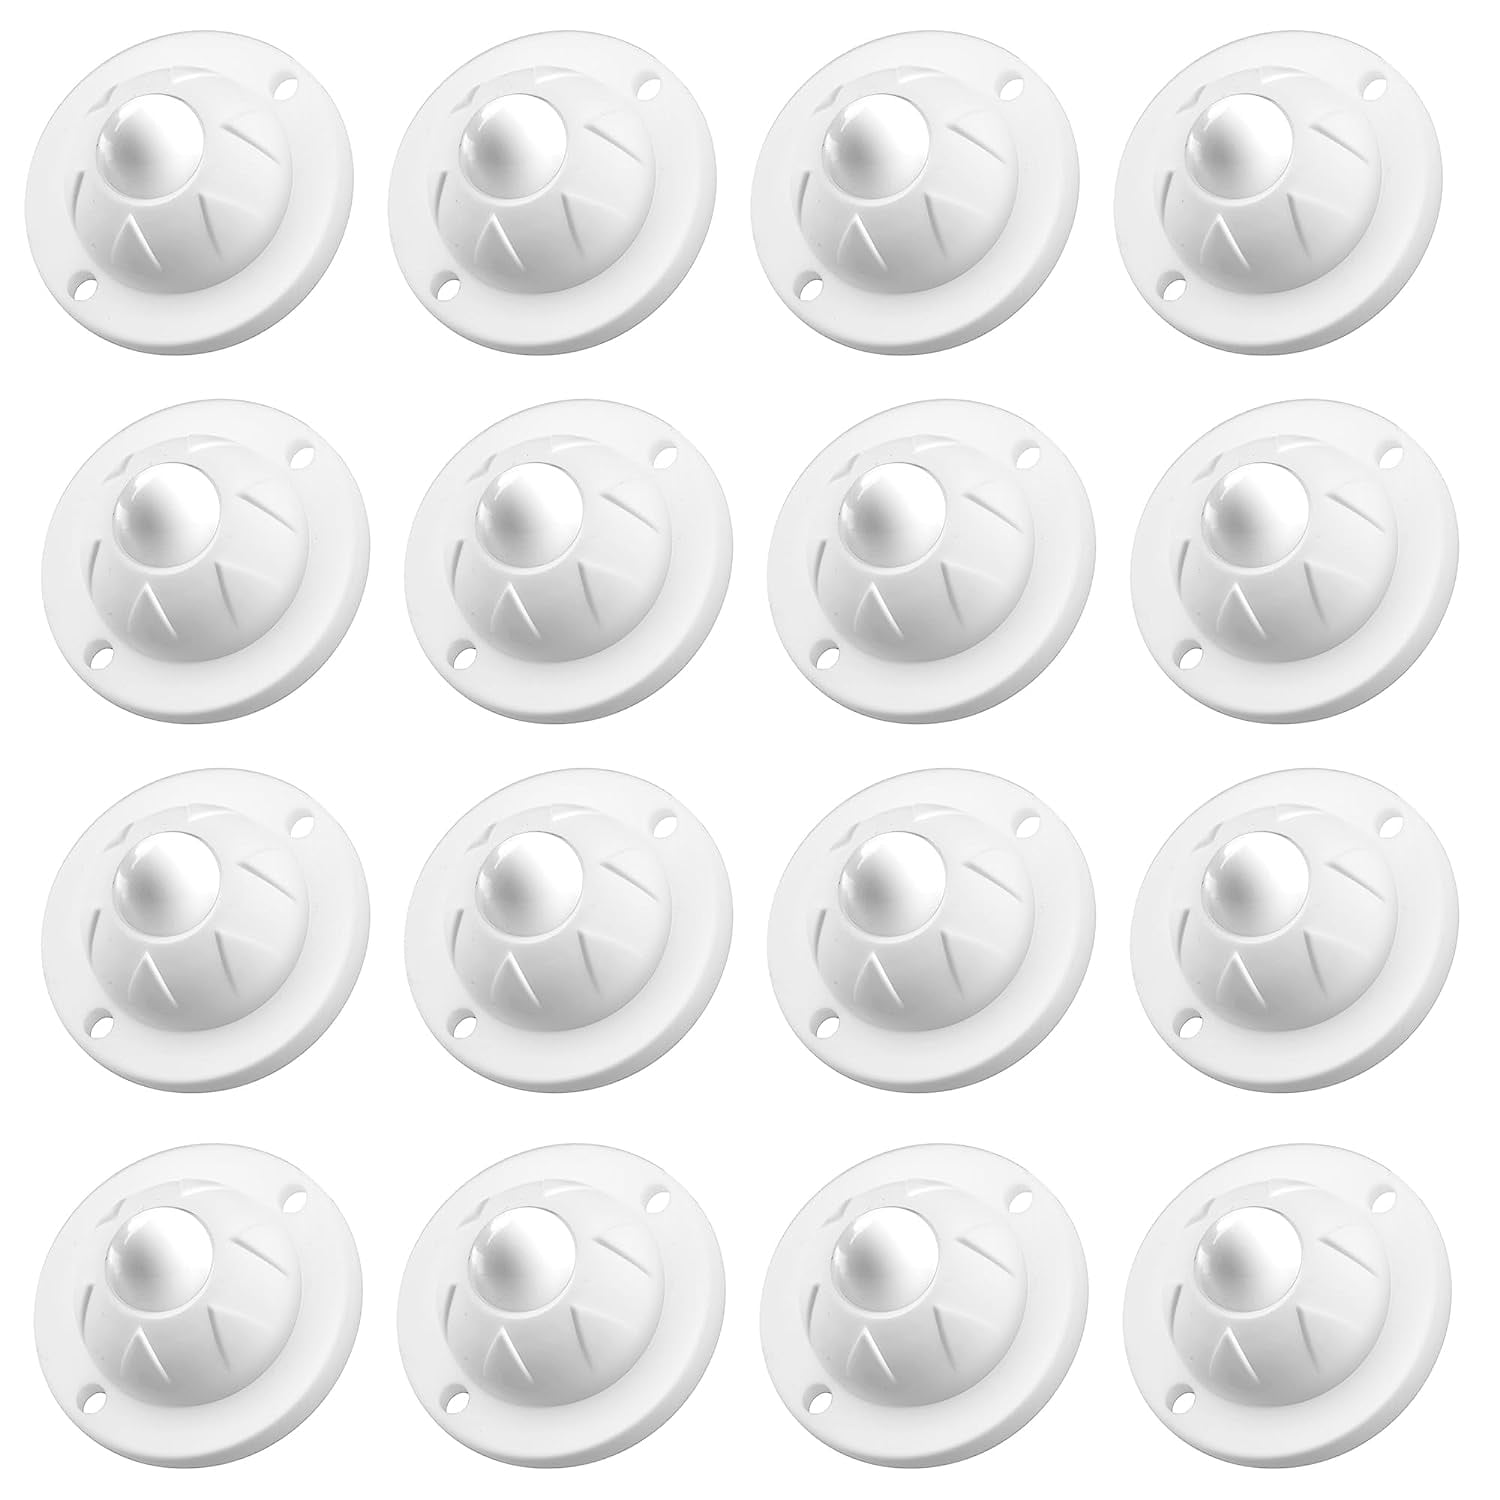  MeyaGo 16PCS Mini Caster Wheels Adhesive Bumpers for KitchenAid  Mixer air Fryer Coffee Maker Bottom Kitchen Countertops Appliances Rubber  Pads Non-Slip Bumpers Rolling Wheels Mobility Wheels : Home & Kitchen